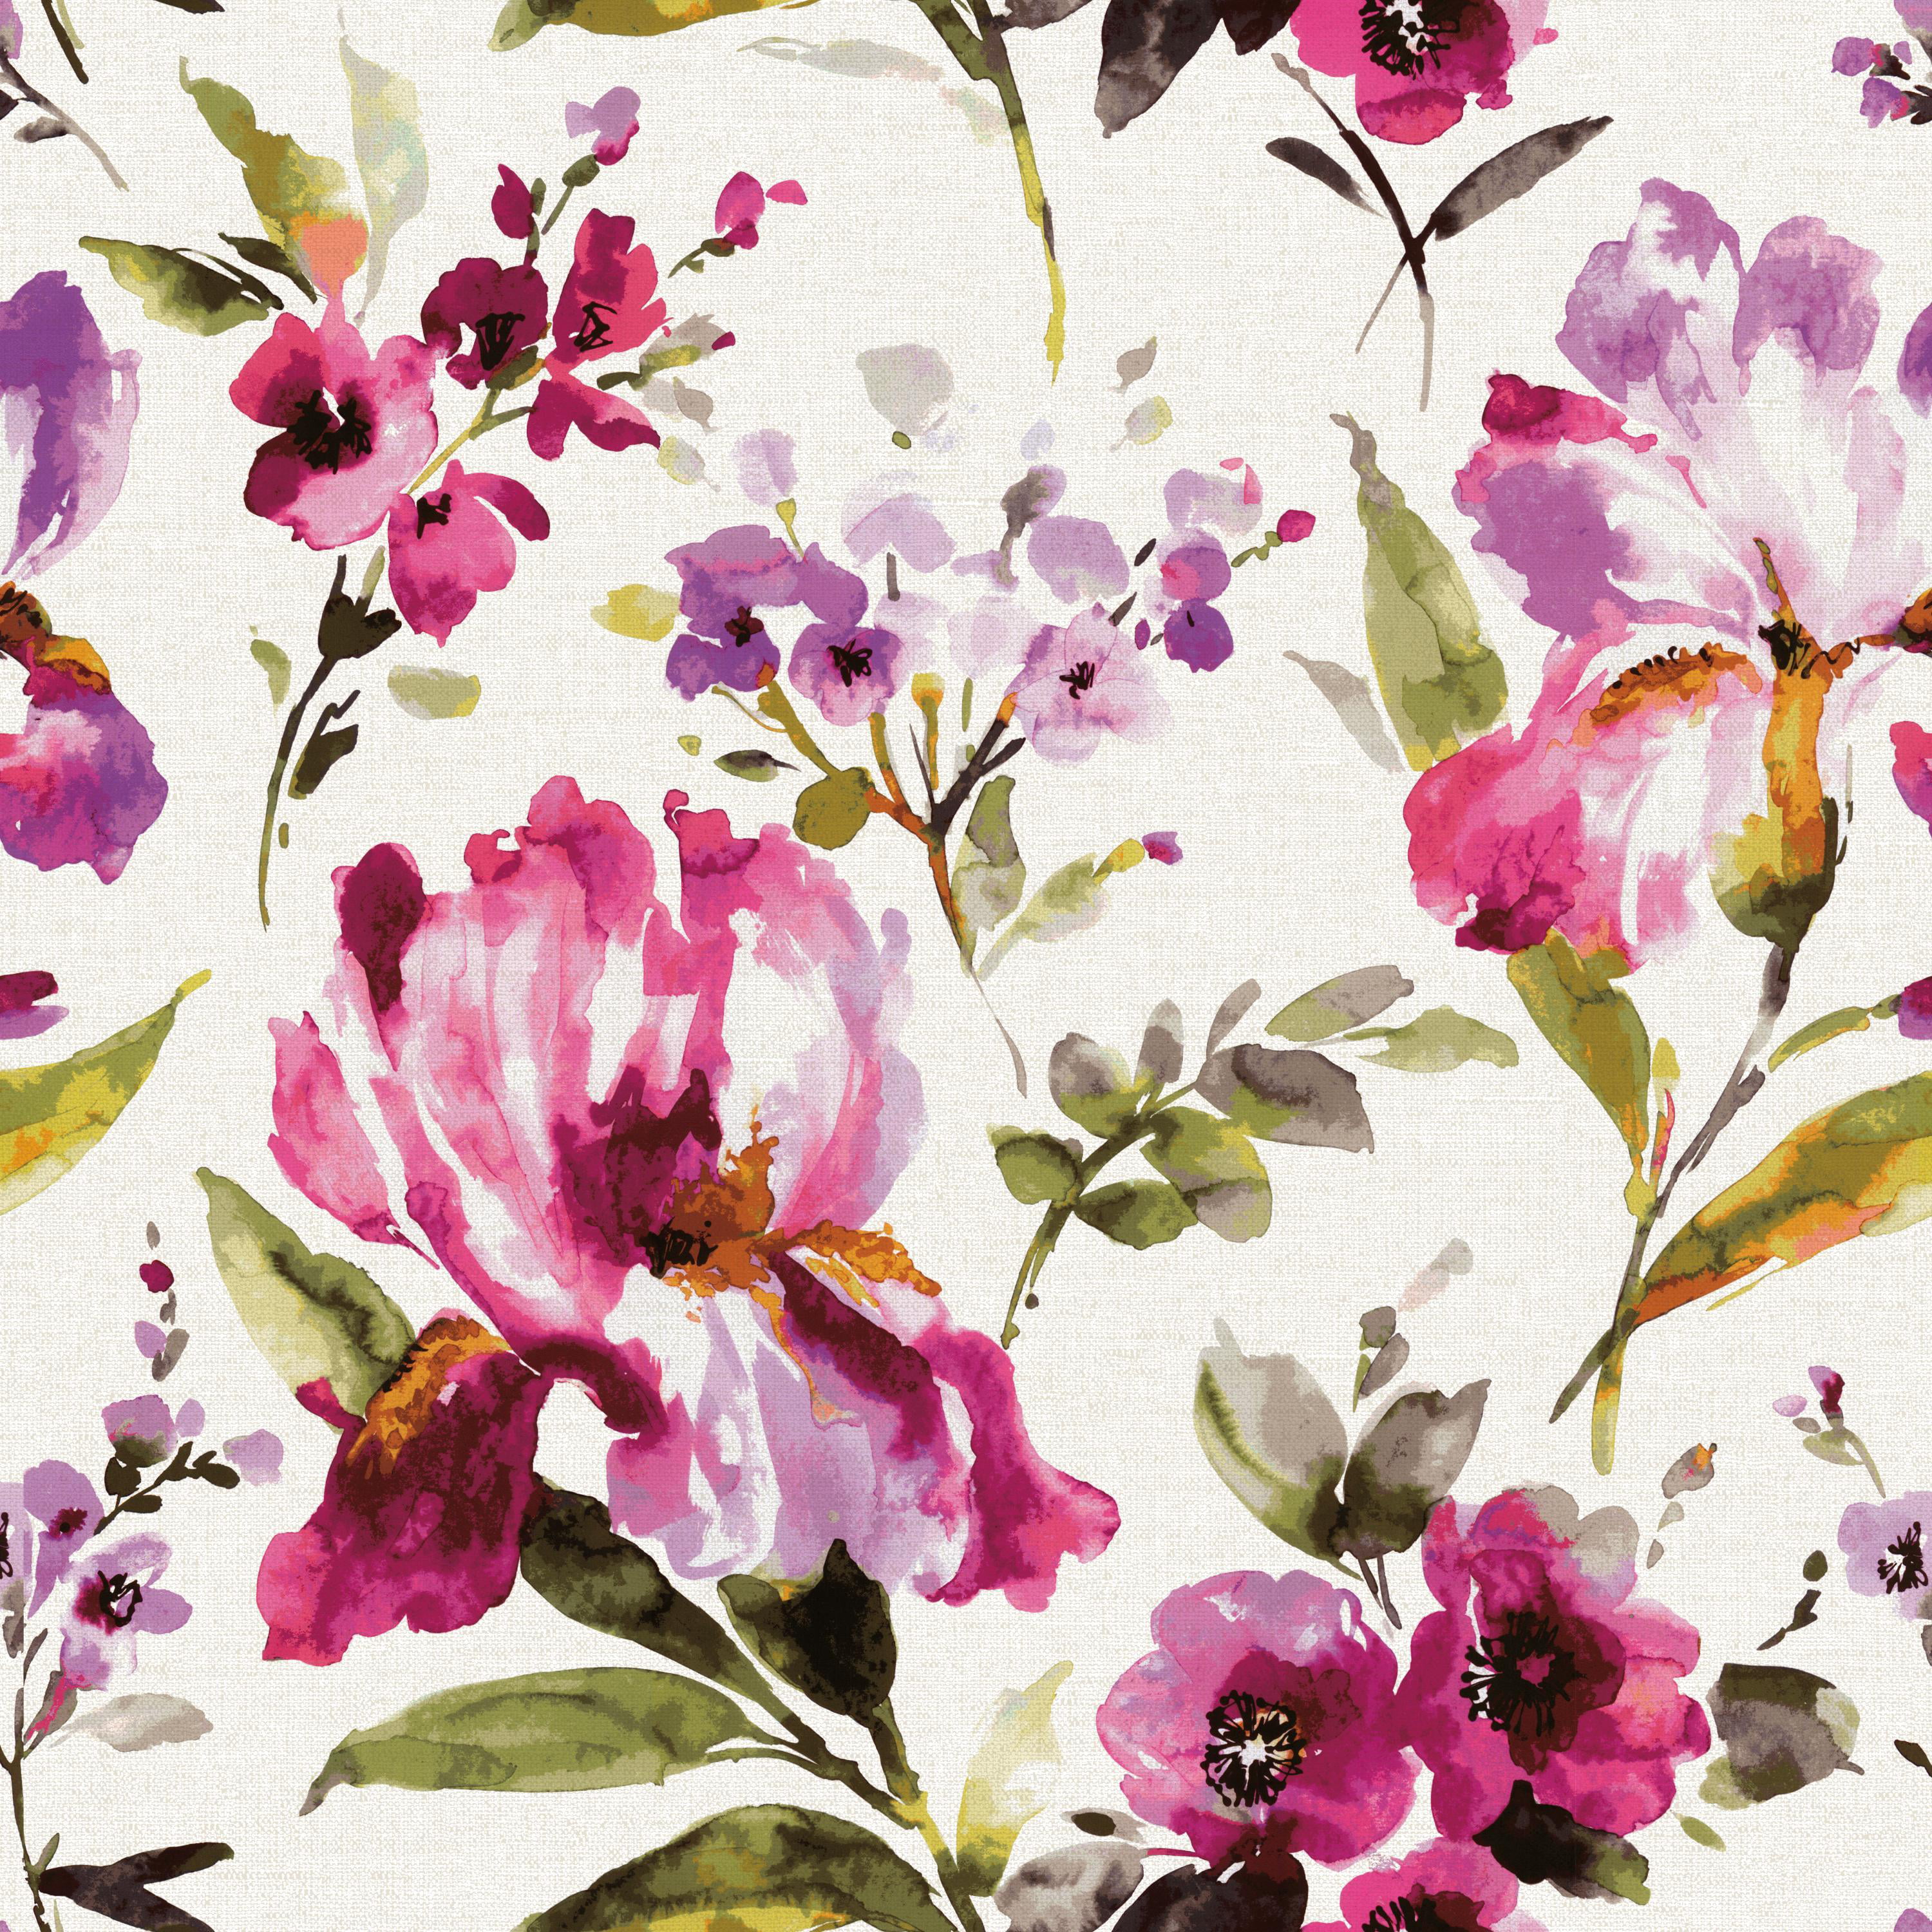 RoomMates Purple and Pink Iris Floral Peel and Stick Wallpaper